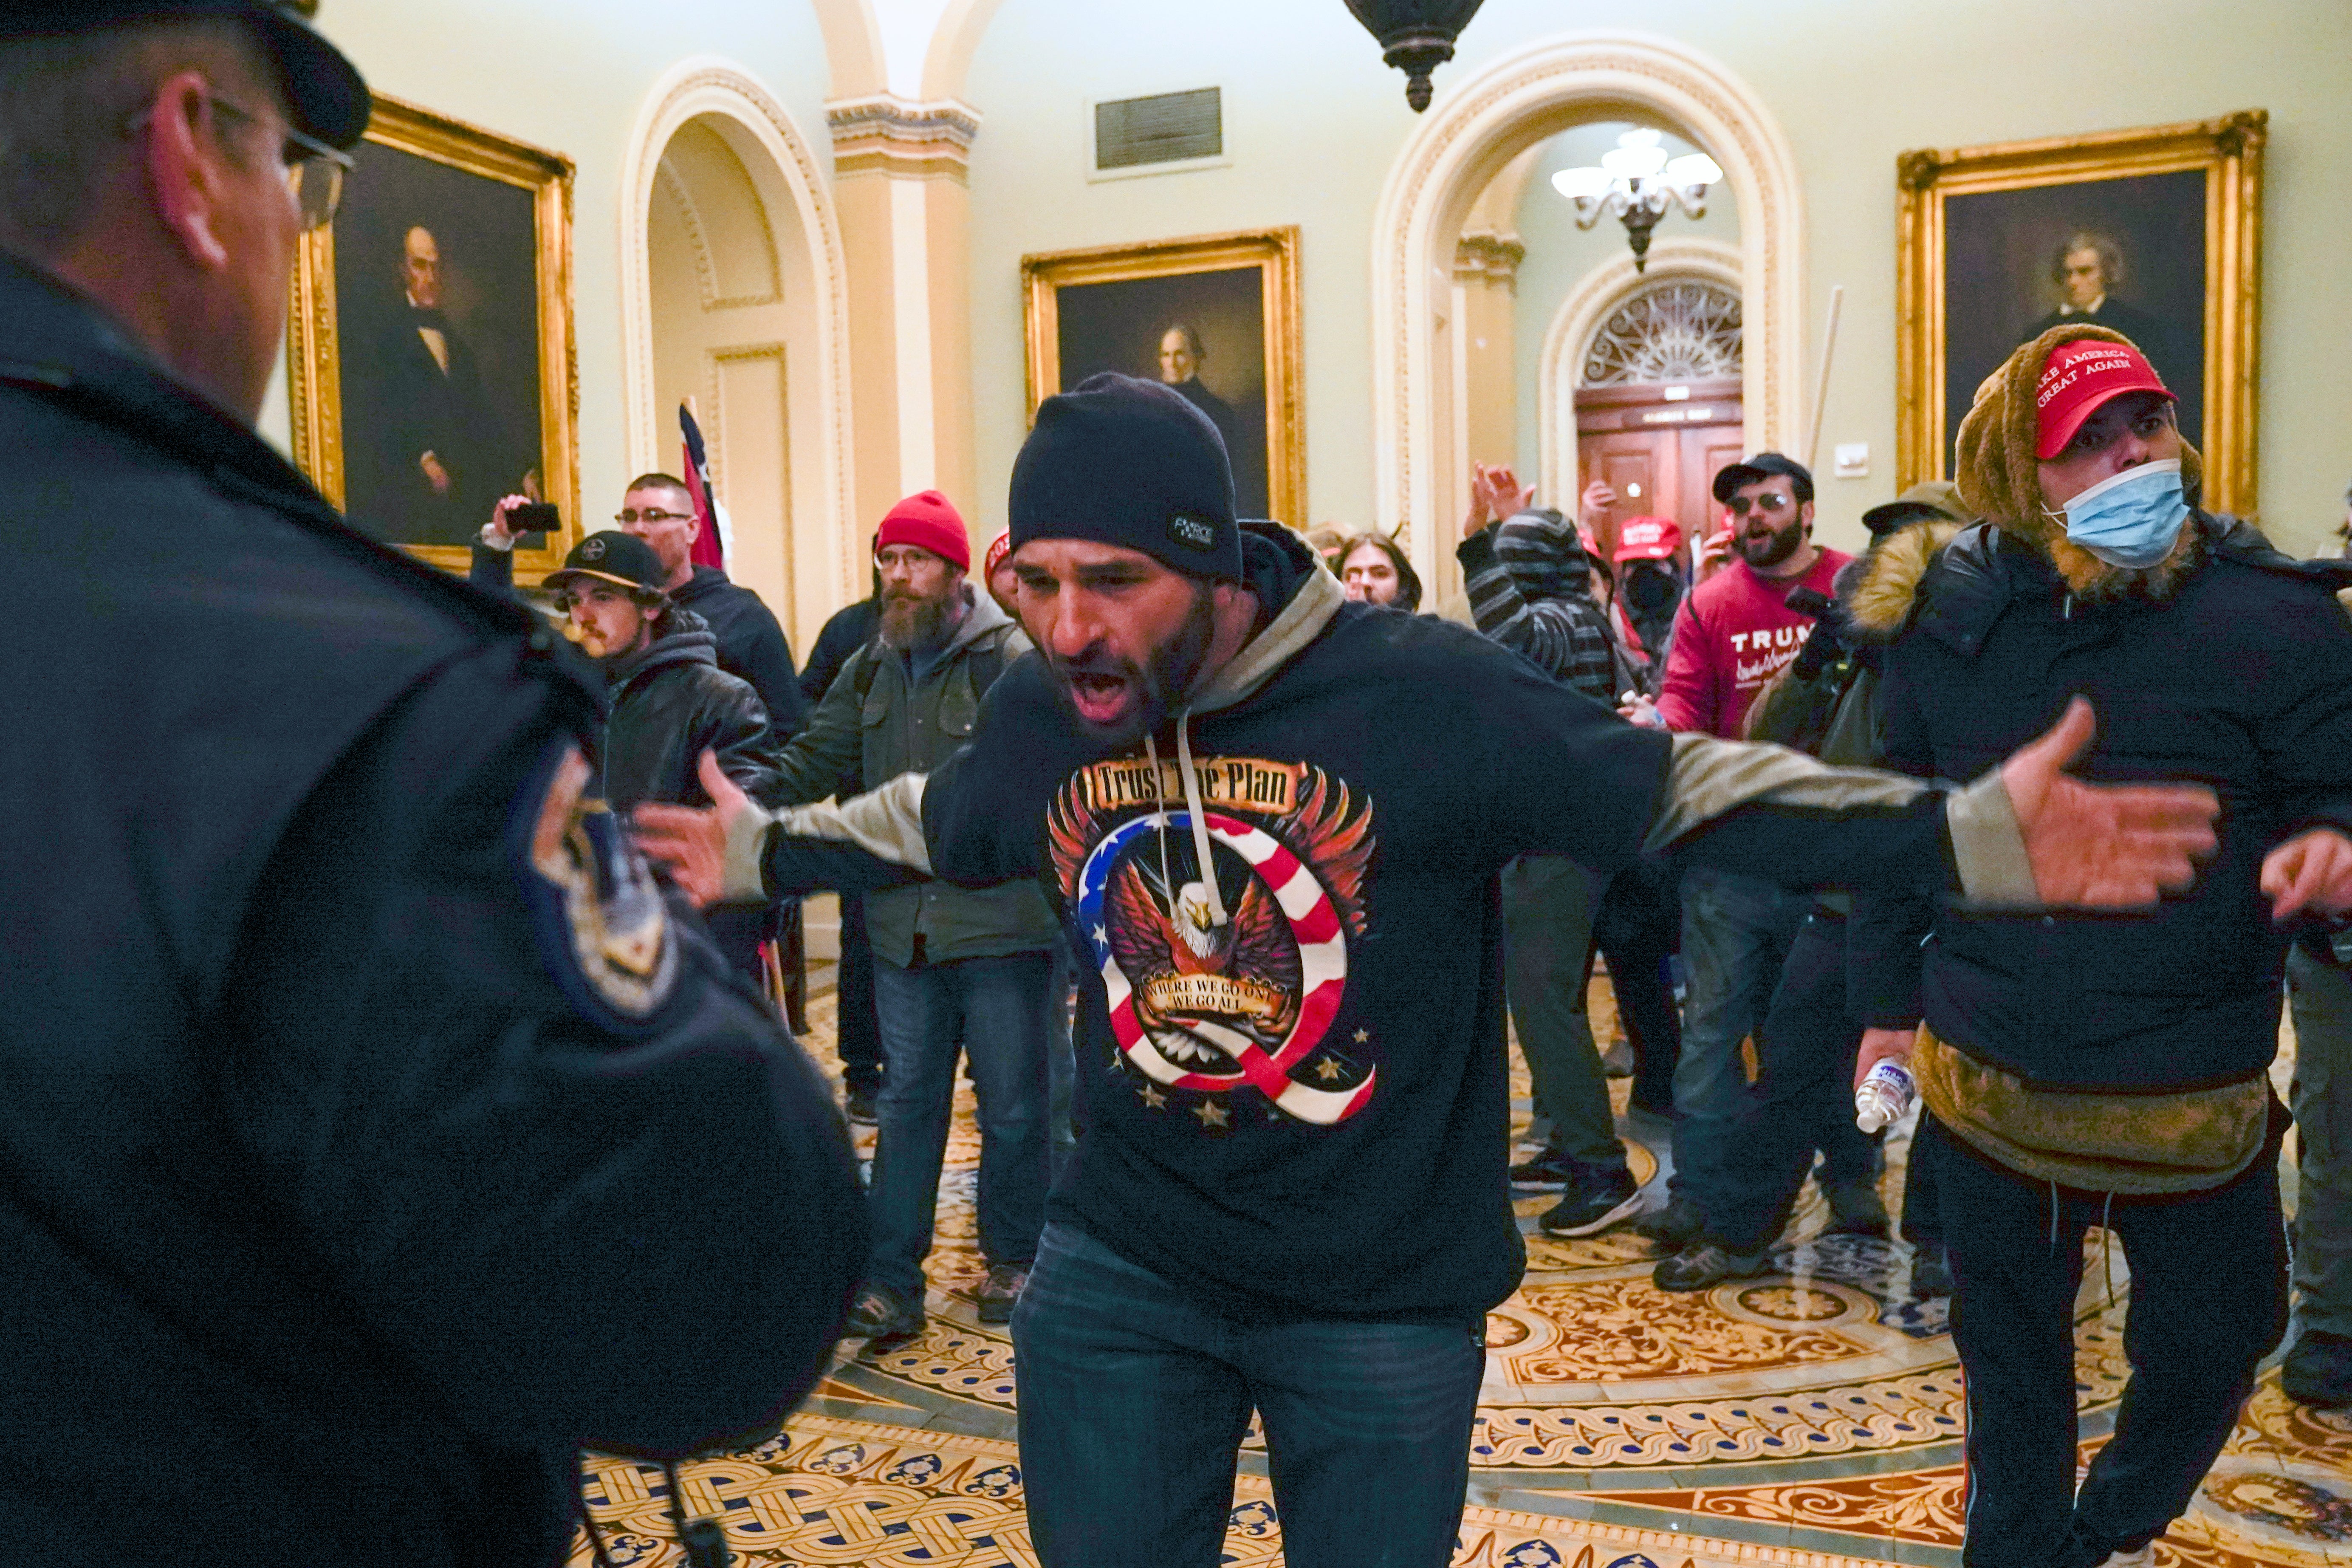 File: Trump supporters, including Doug Jensen, centre, confront US Capitol police in the hallway outside of the Senate chamber at the Capitol